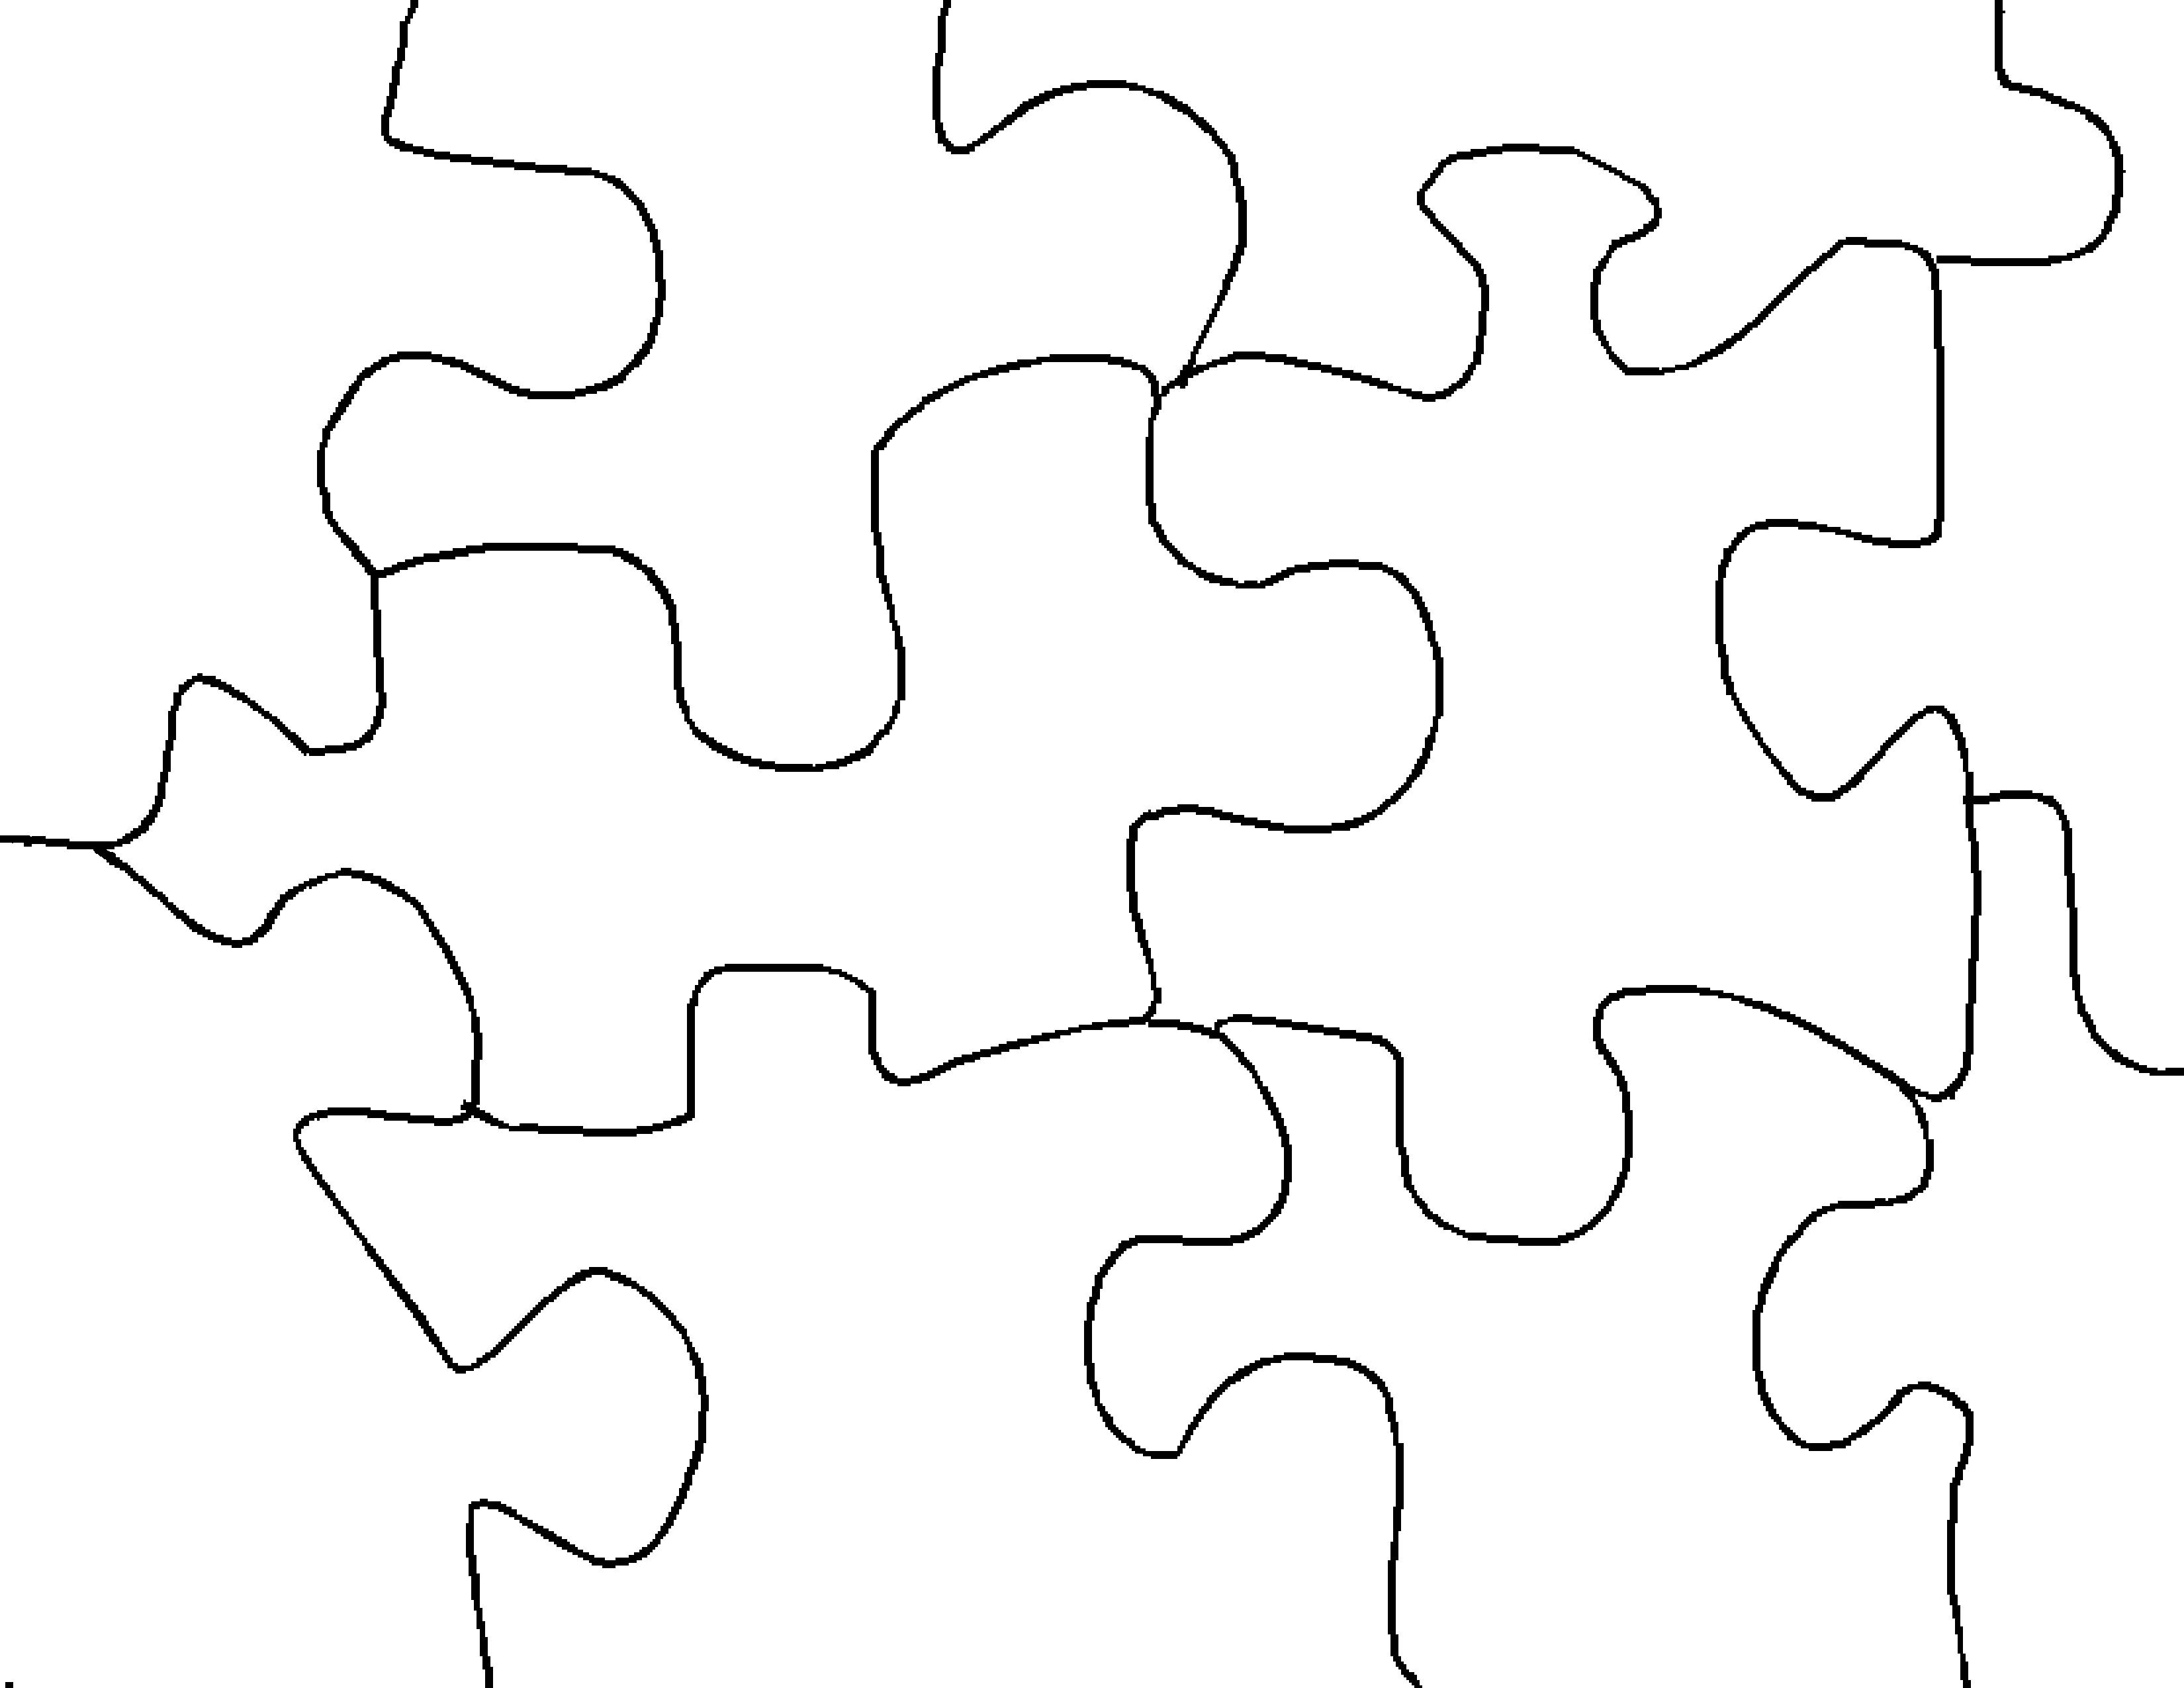 Make Jigsaw Puzzle - Printable Jigsaw Puzzles Pieces